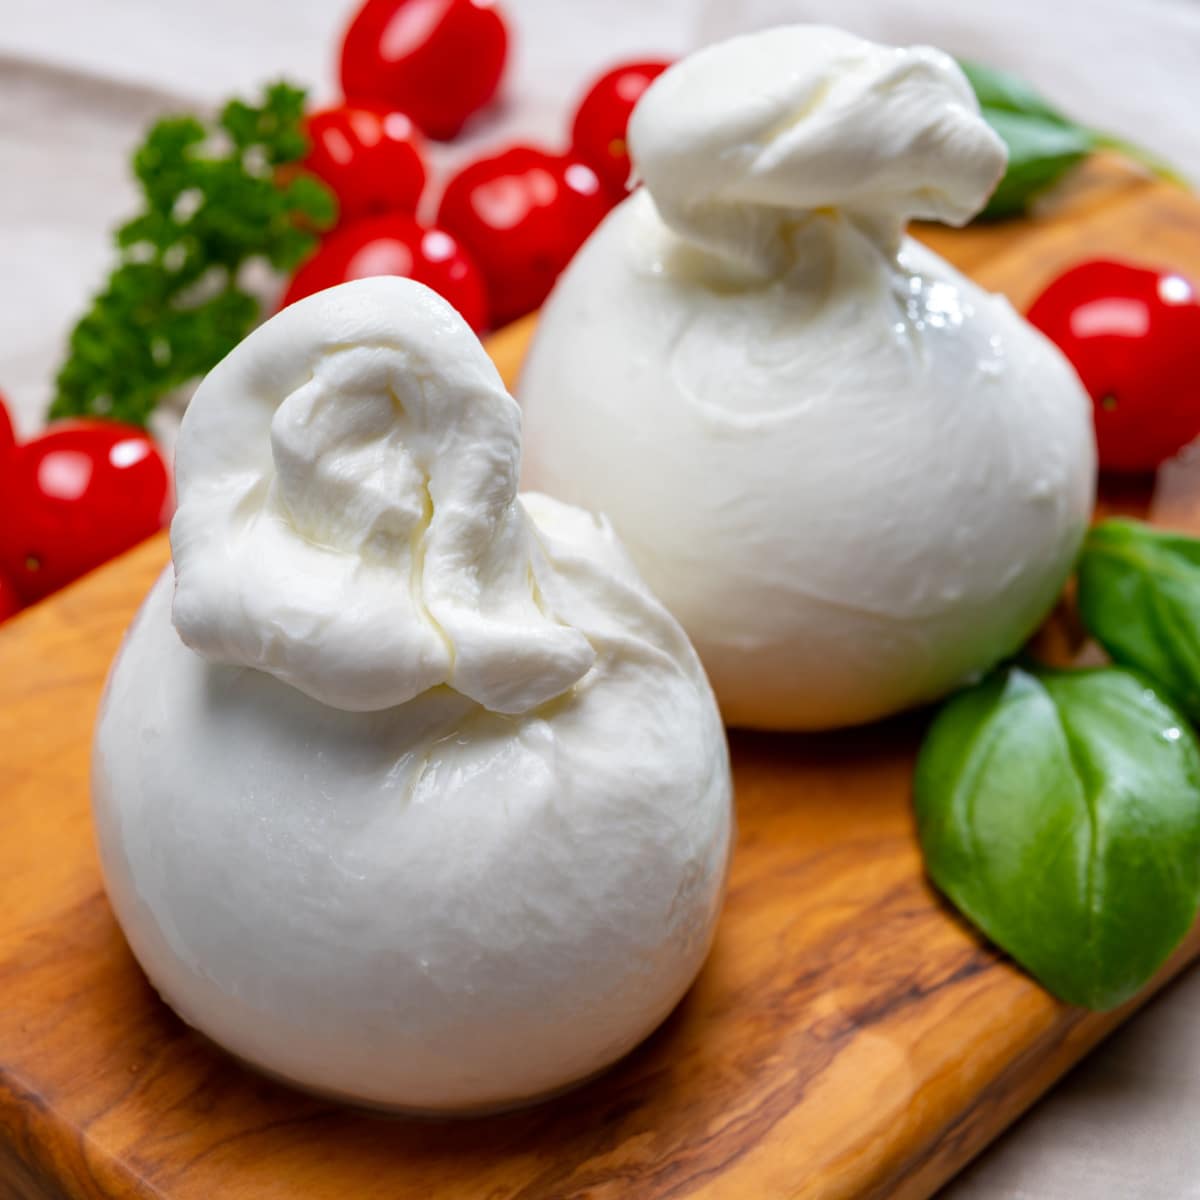 Two Rounded Balls of Mozzarella on a Wooden Cutting Board